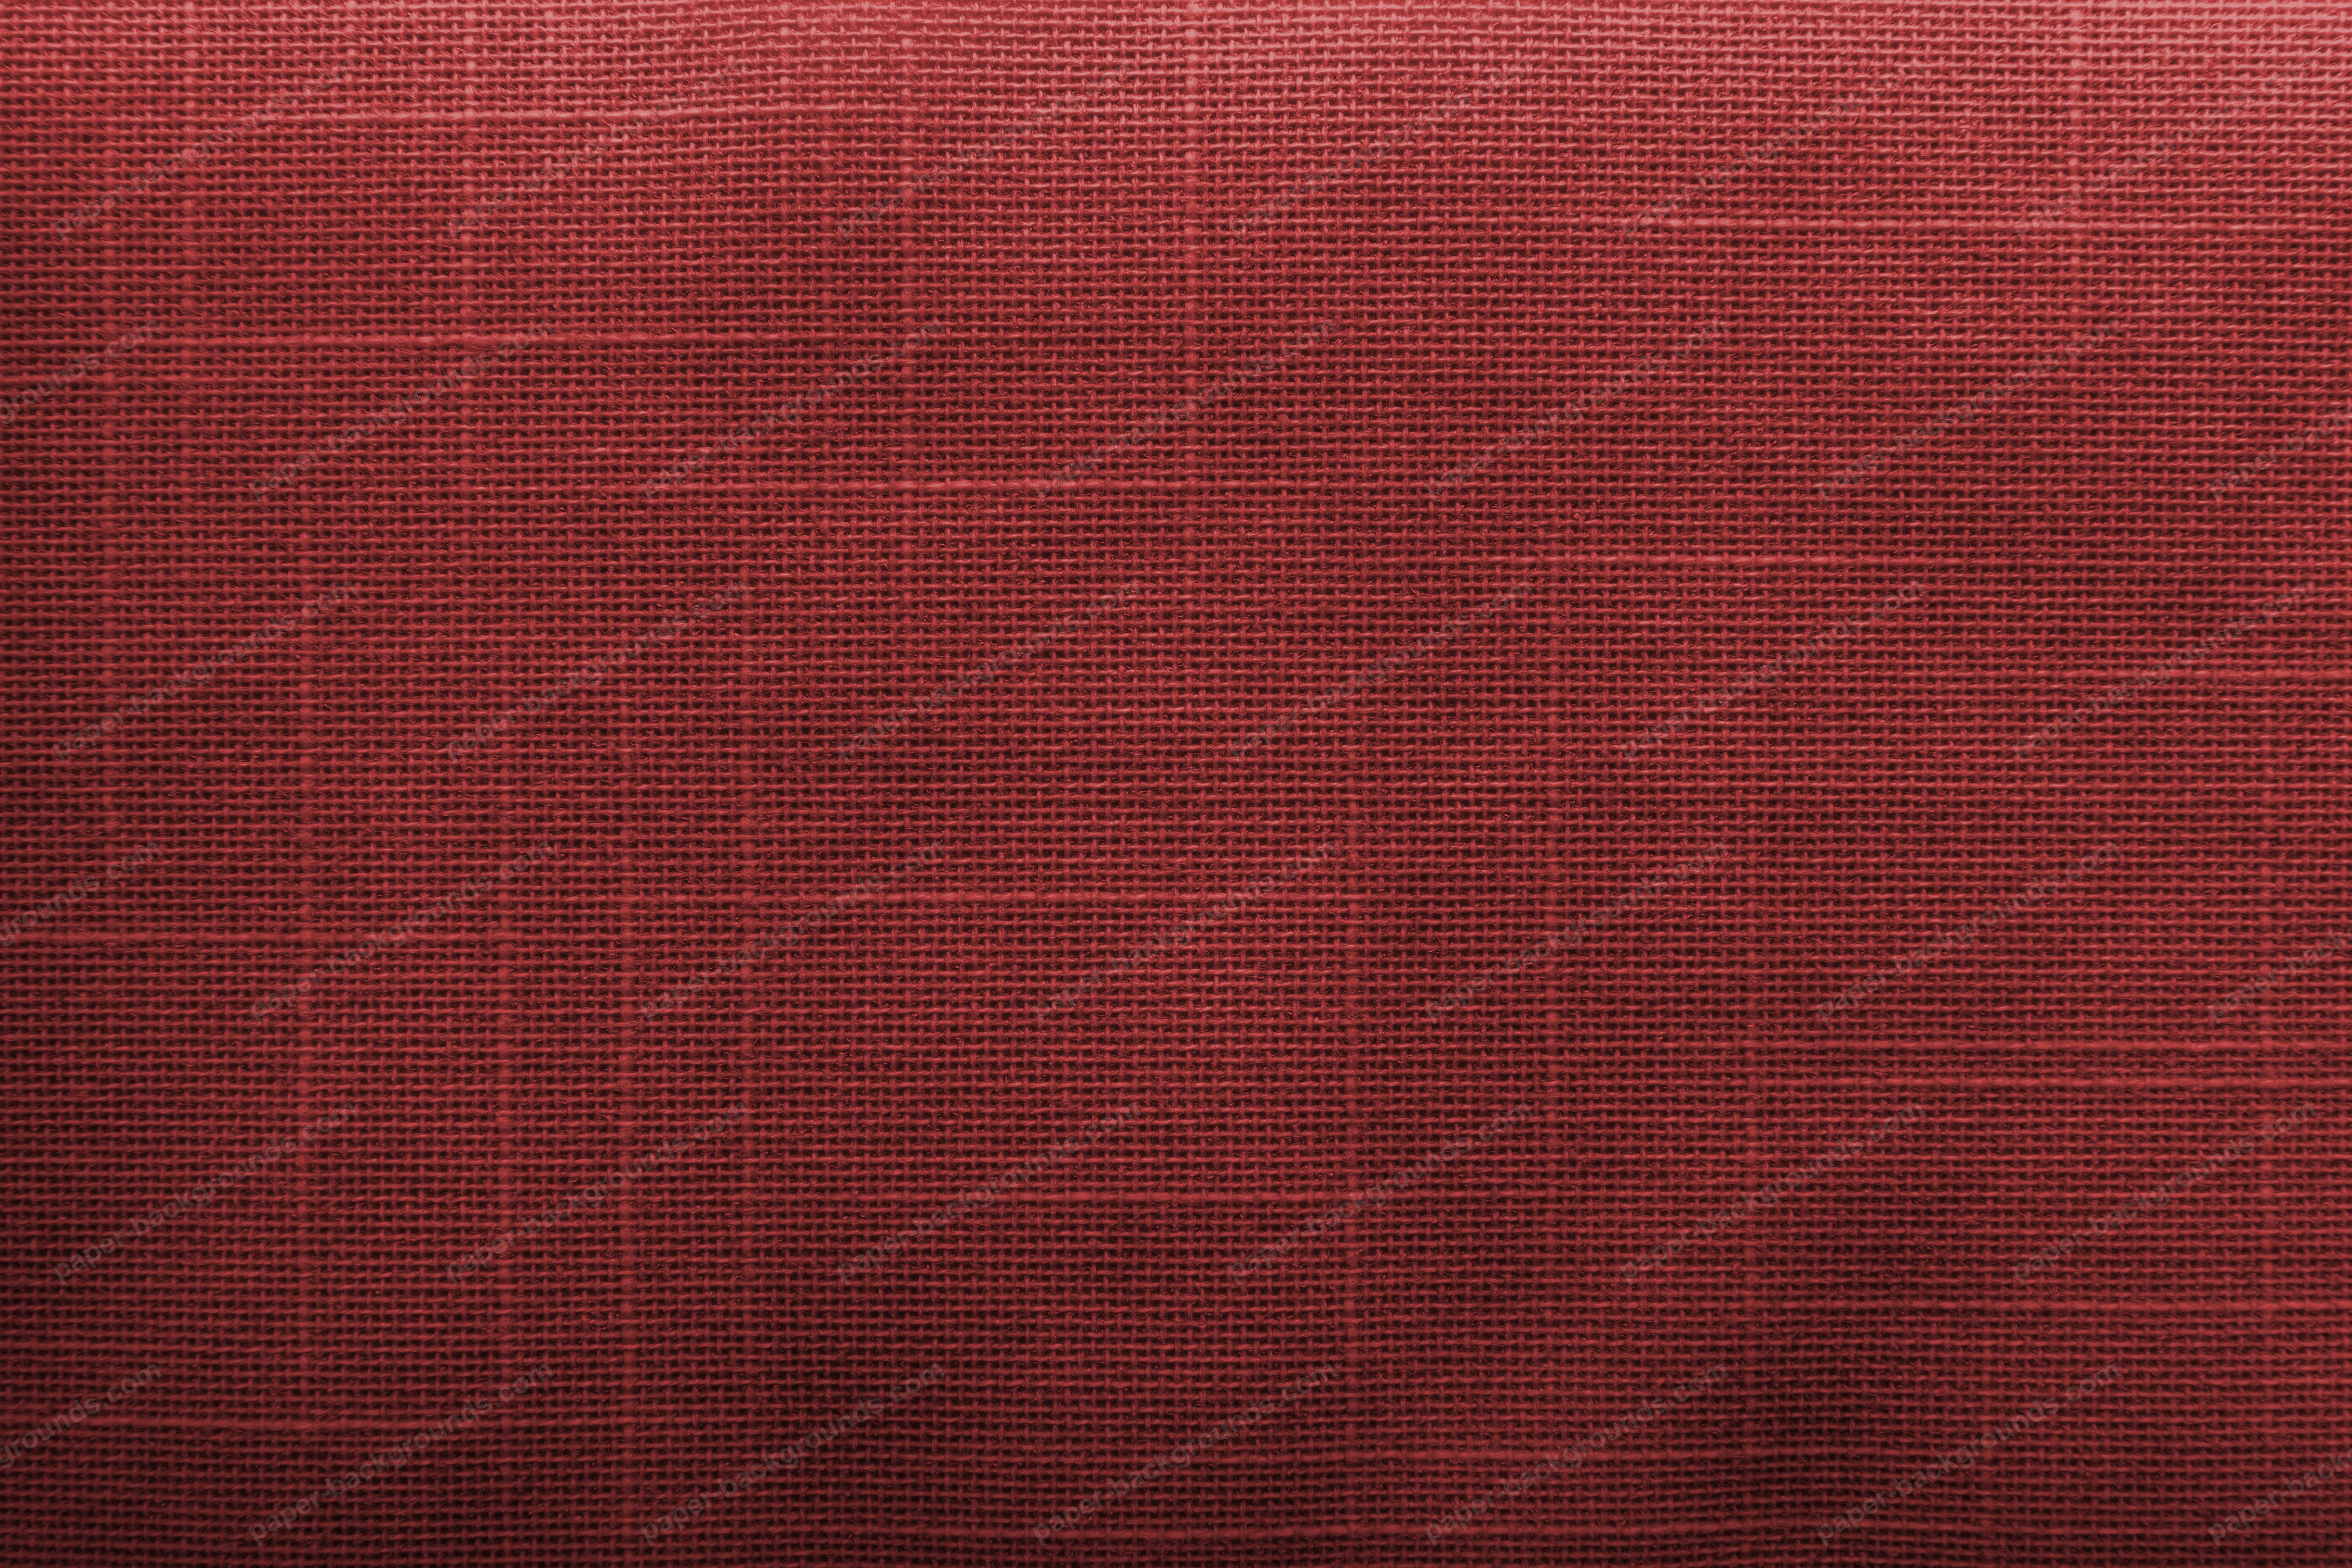 Paper Backgrounds | Red Canvas Fabric Texture